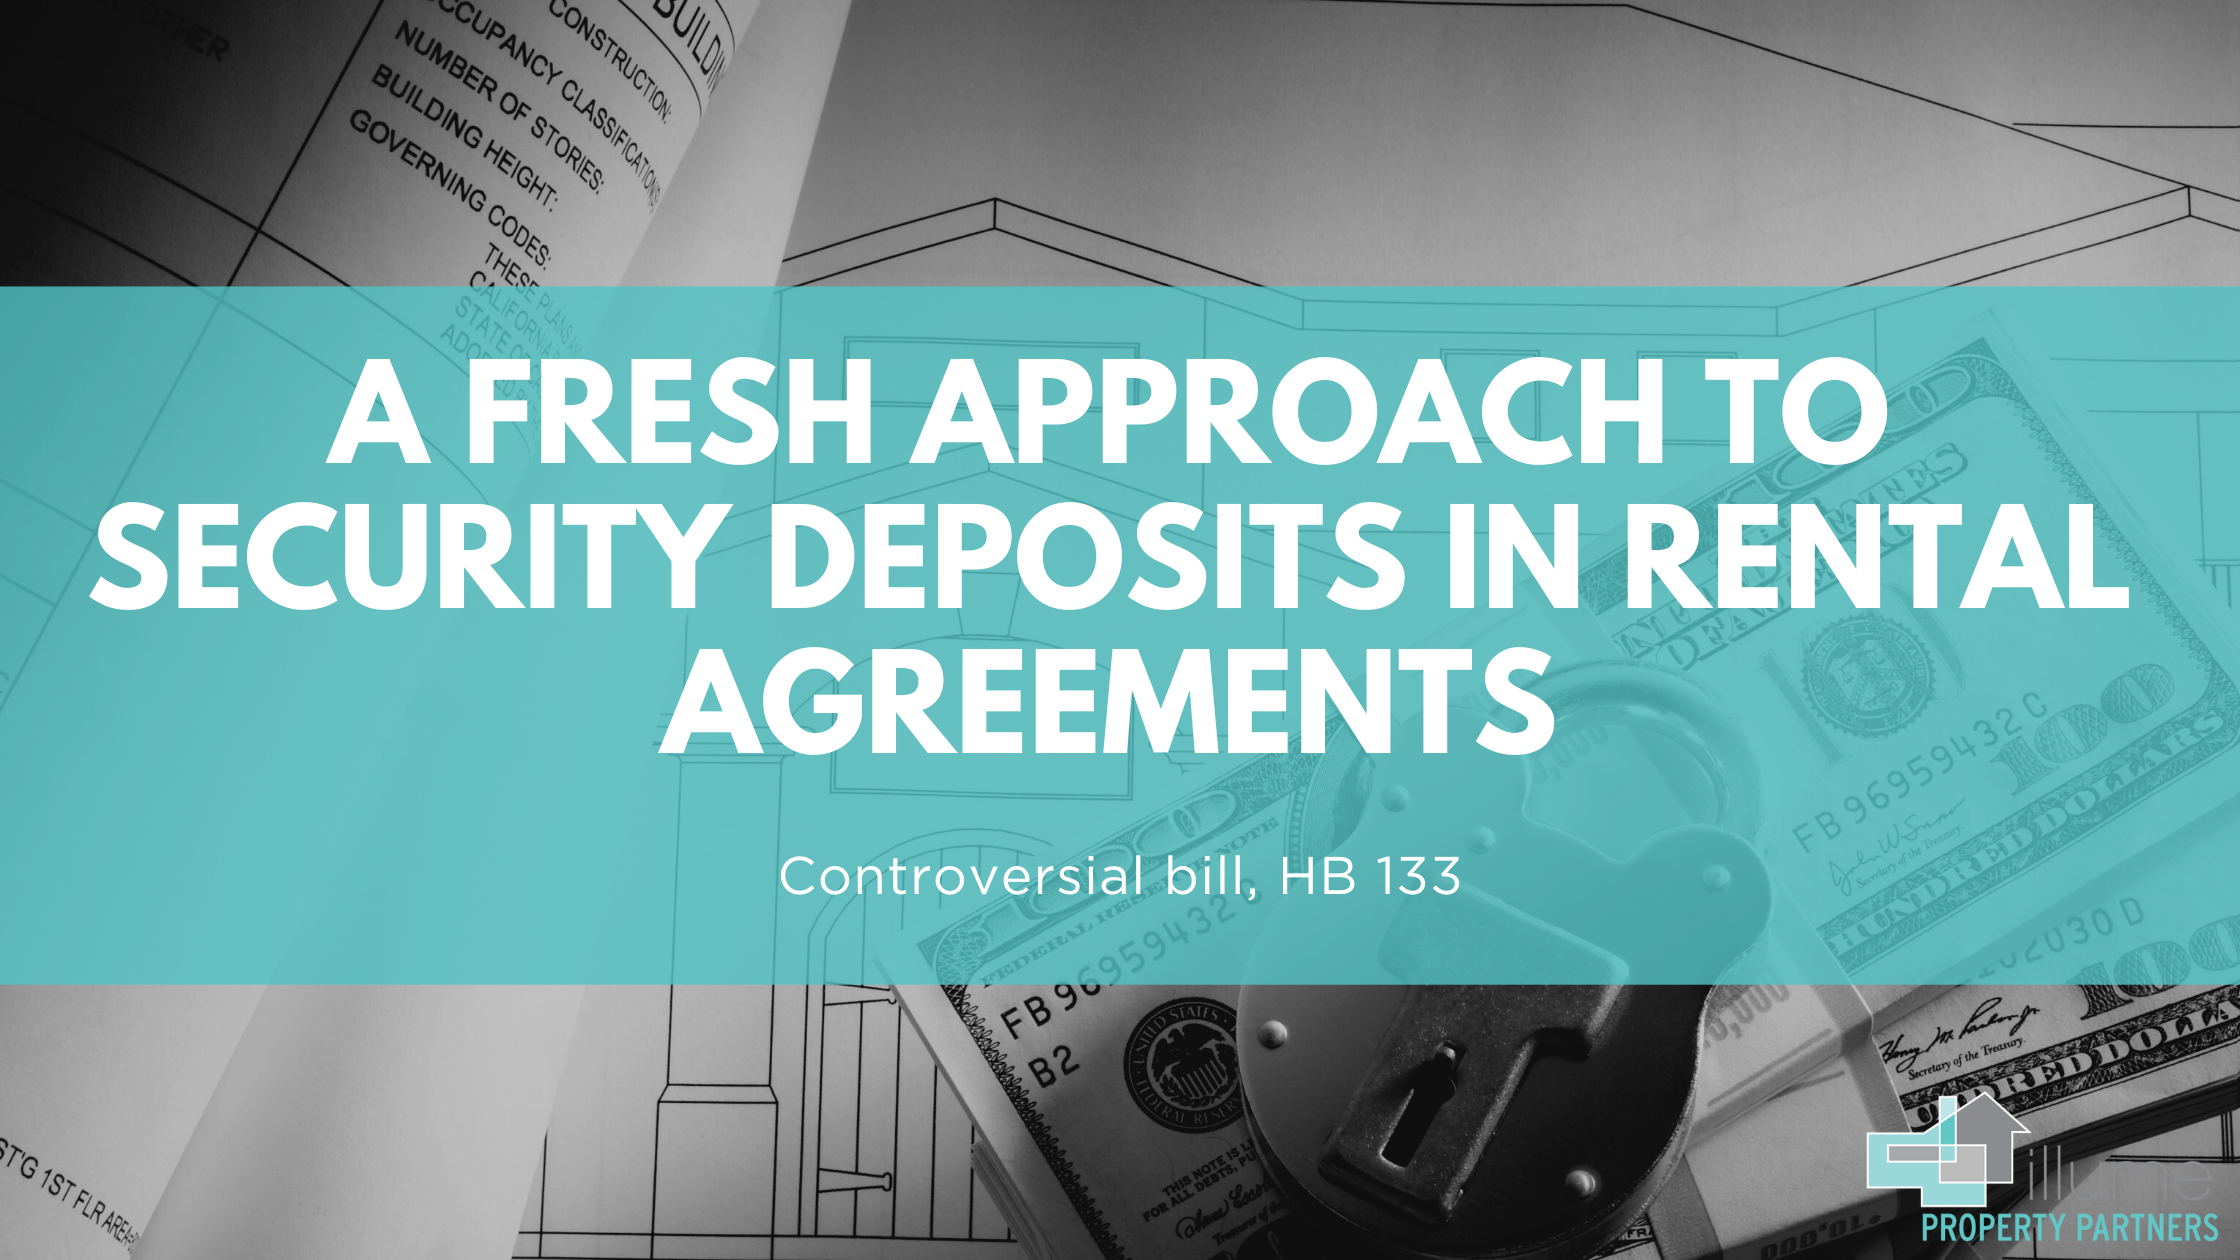 A Fresh Approach to Security Deposits in Rental Agreements